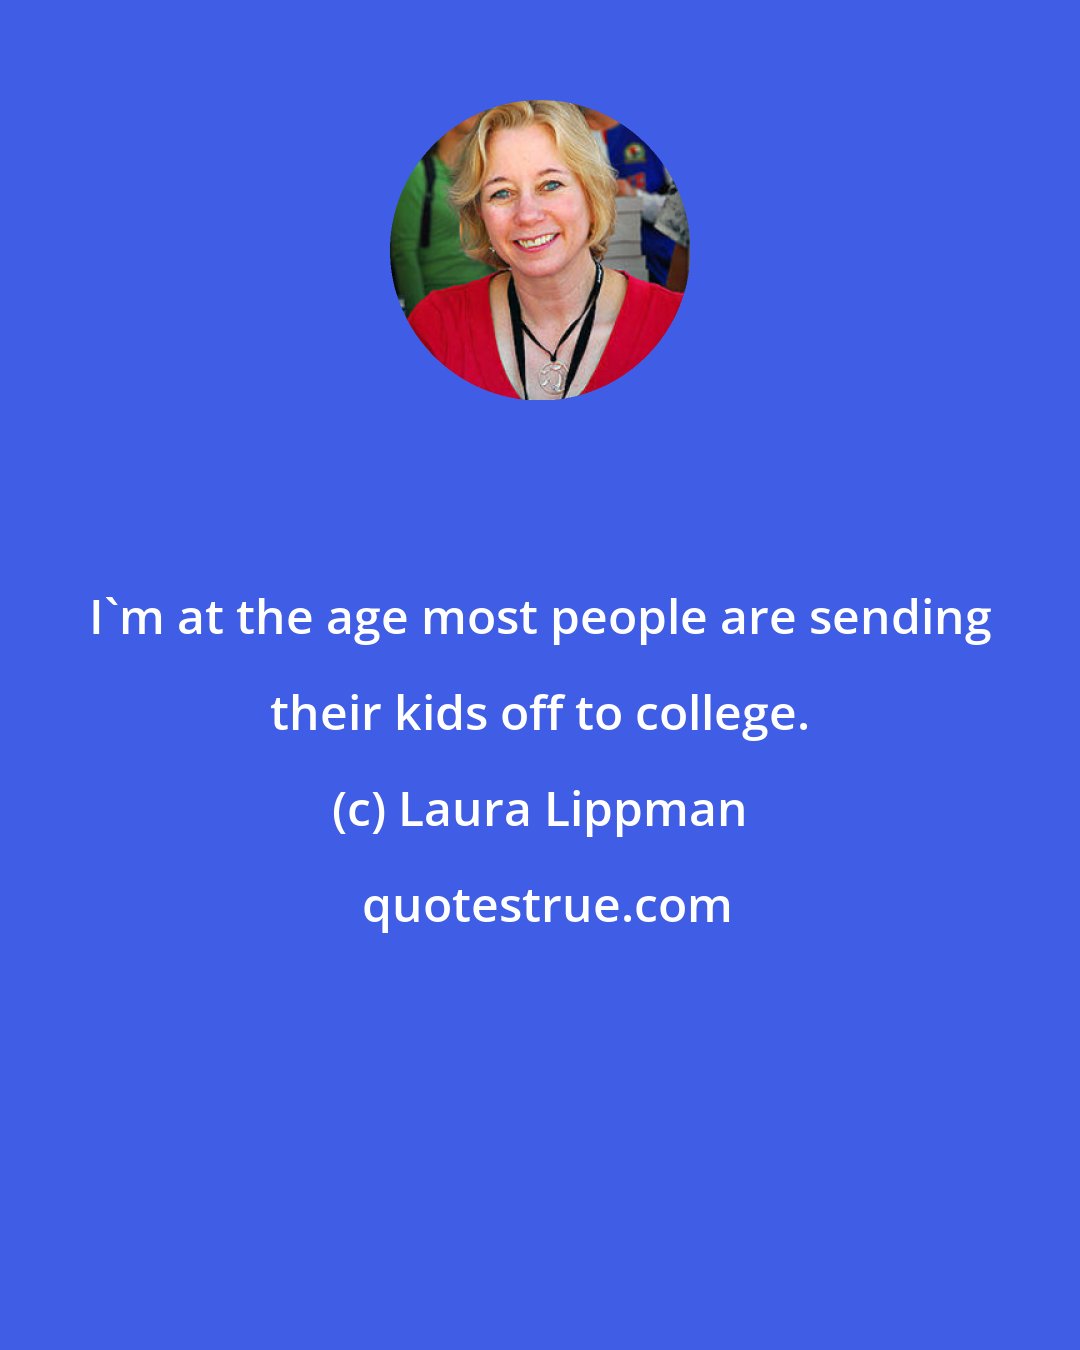 Laura Lippman: I'm at the age most people are sending their kids off to college.